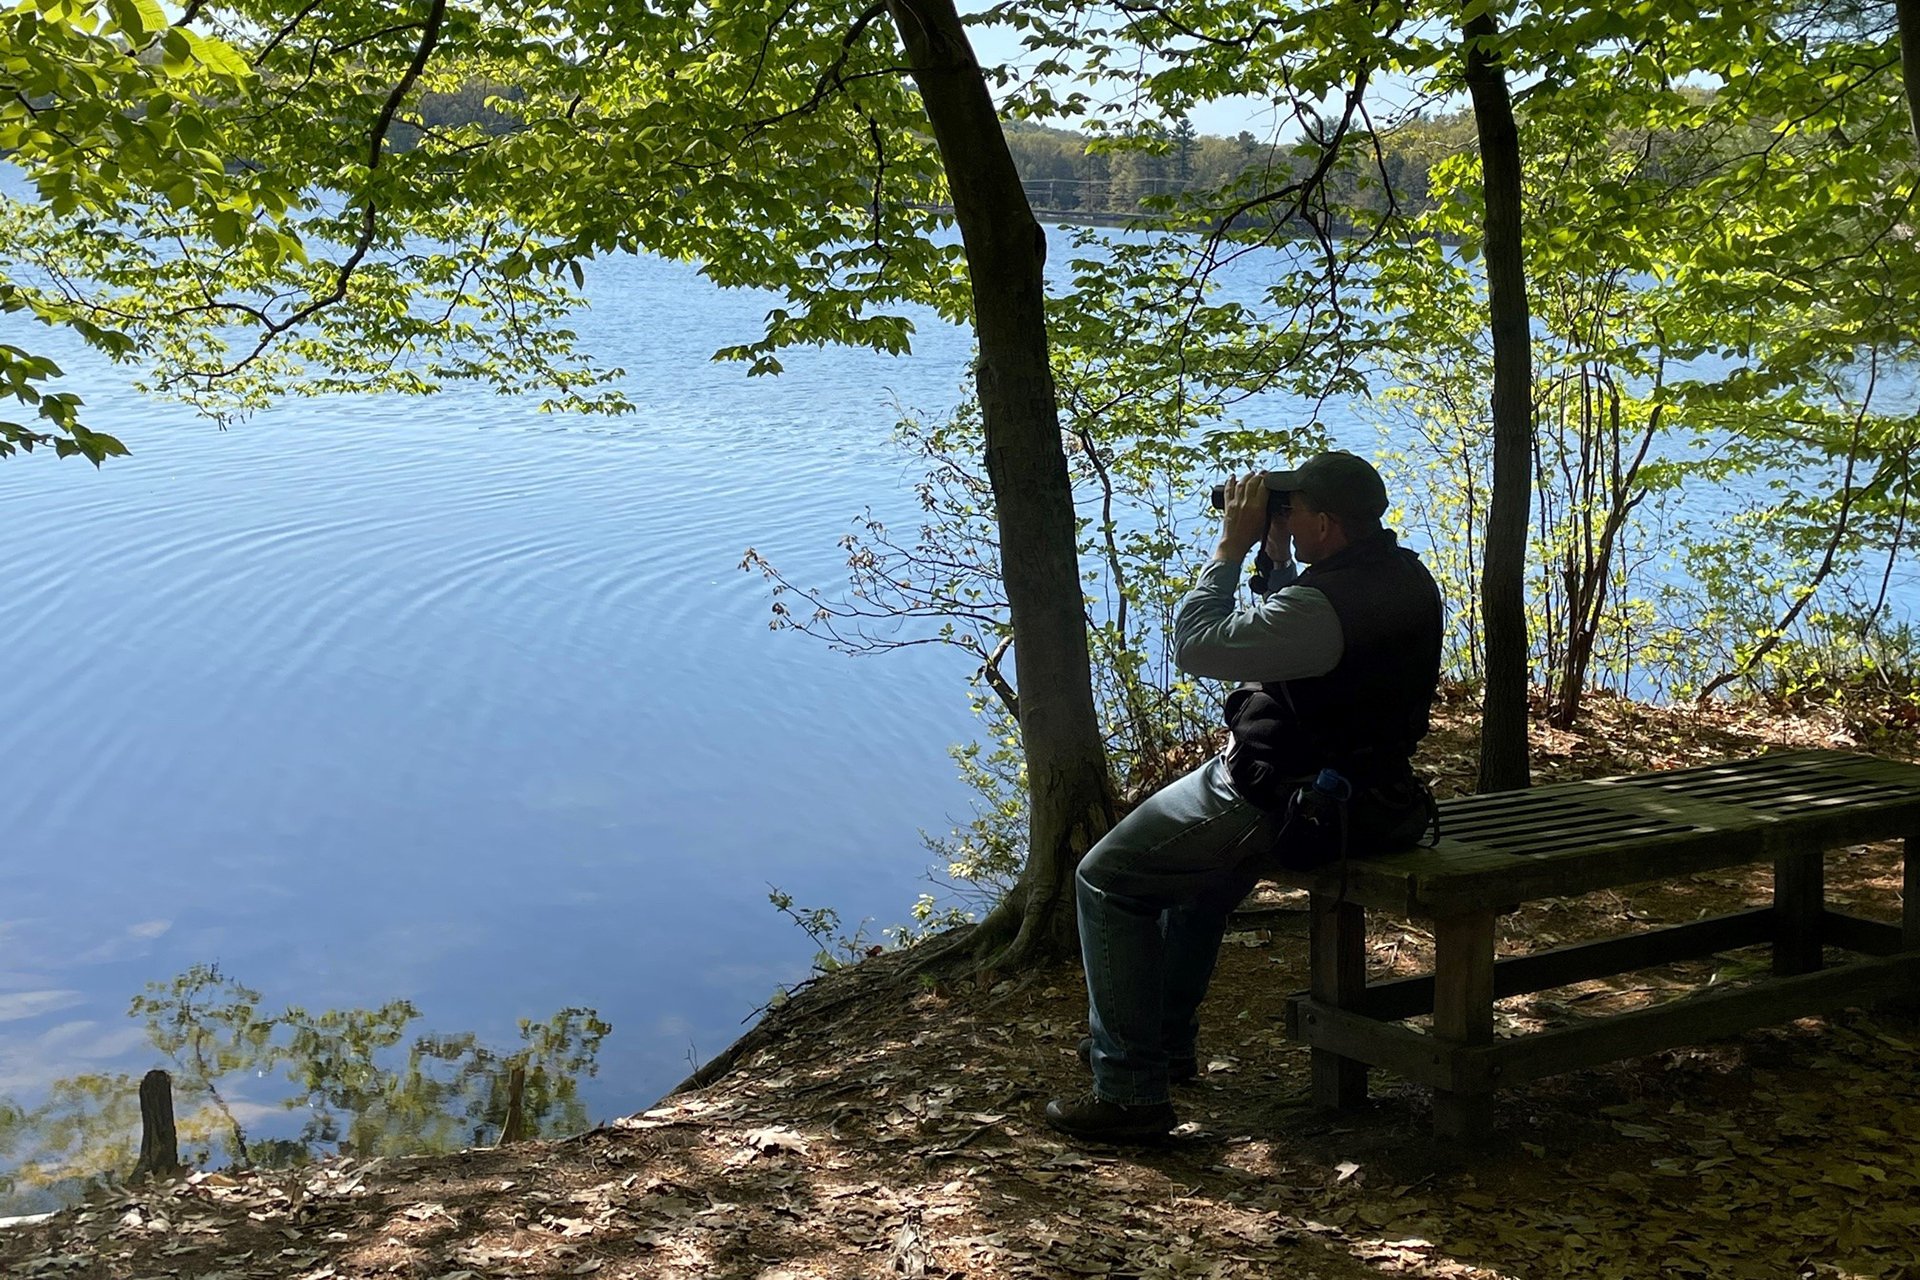 Man sitting on a bench looking through binoculars out over a lake